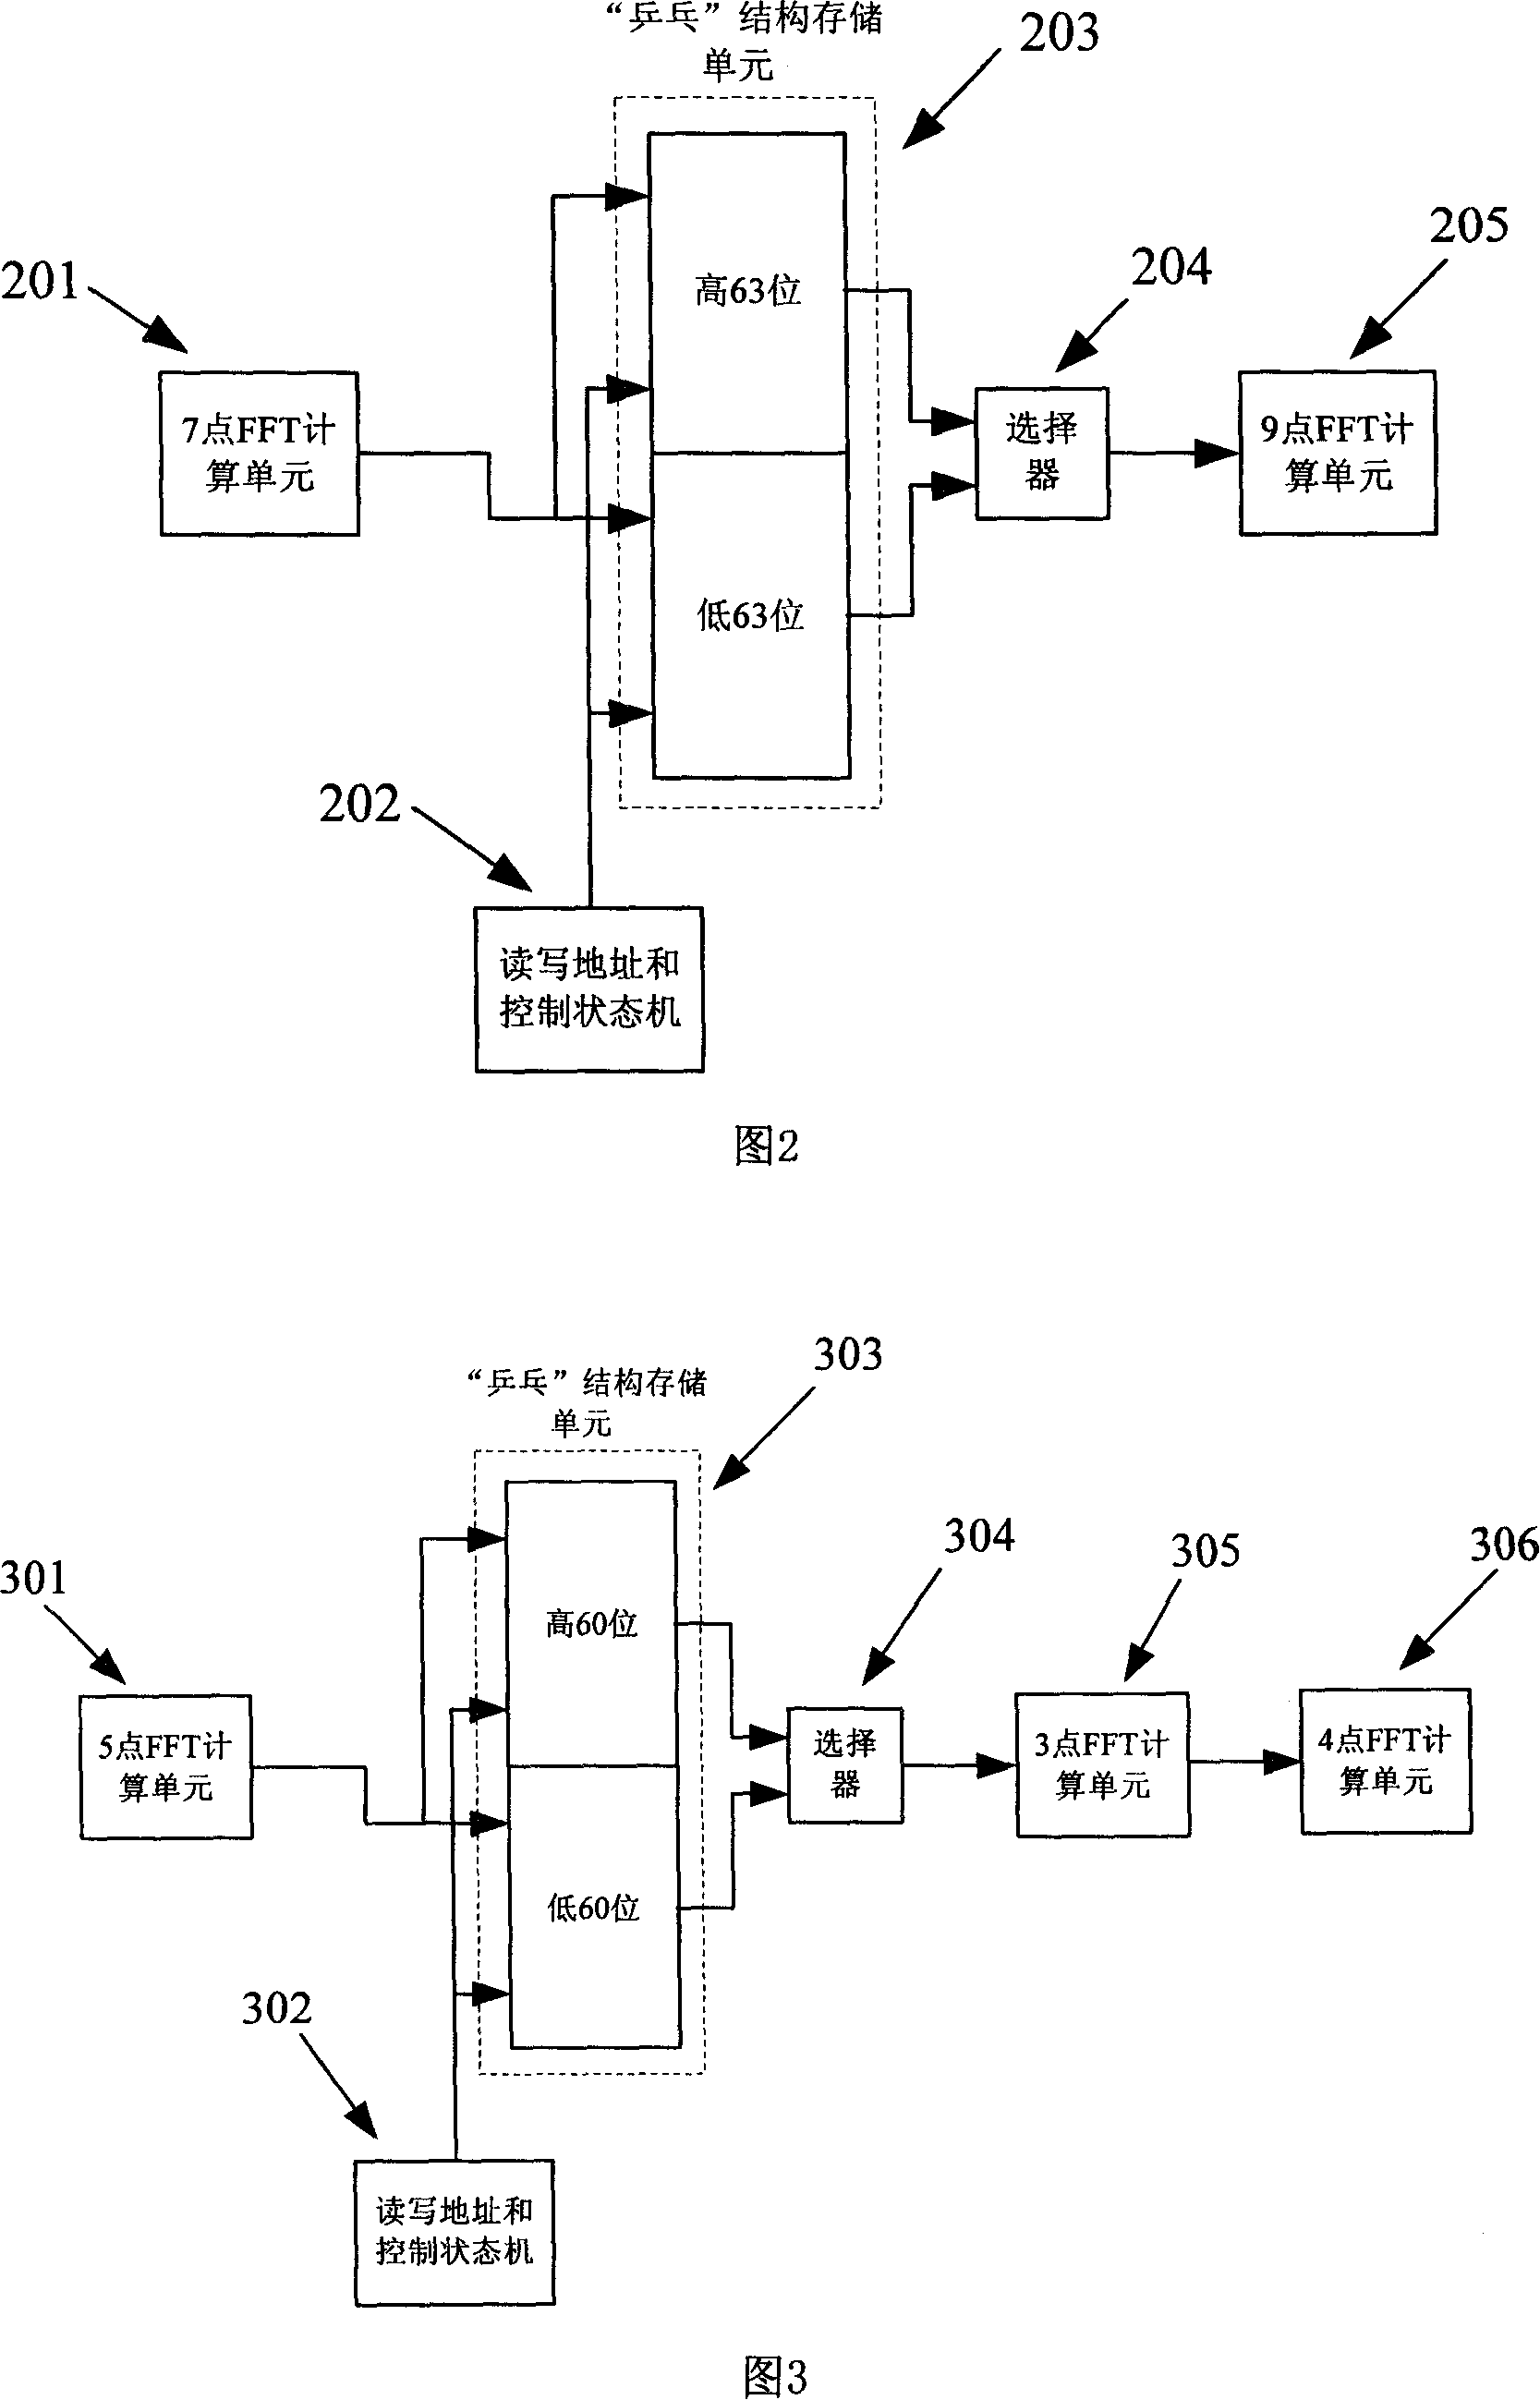 3780-point quick fourier transformation processor of pipelining structure